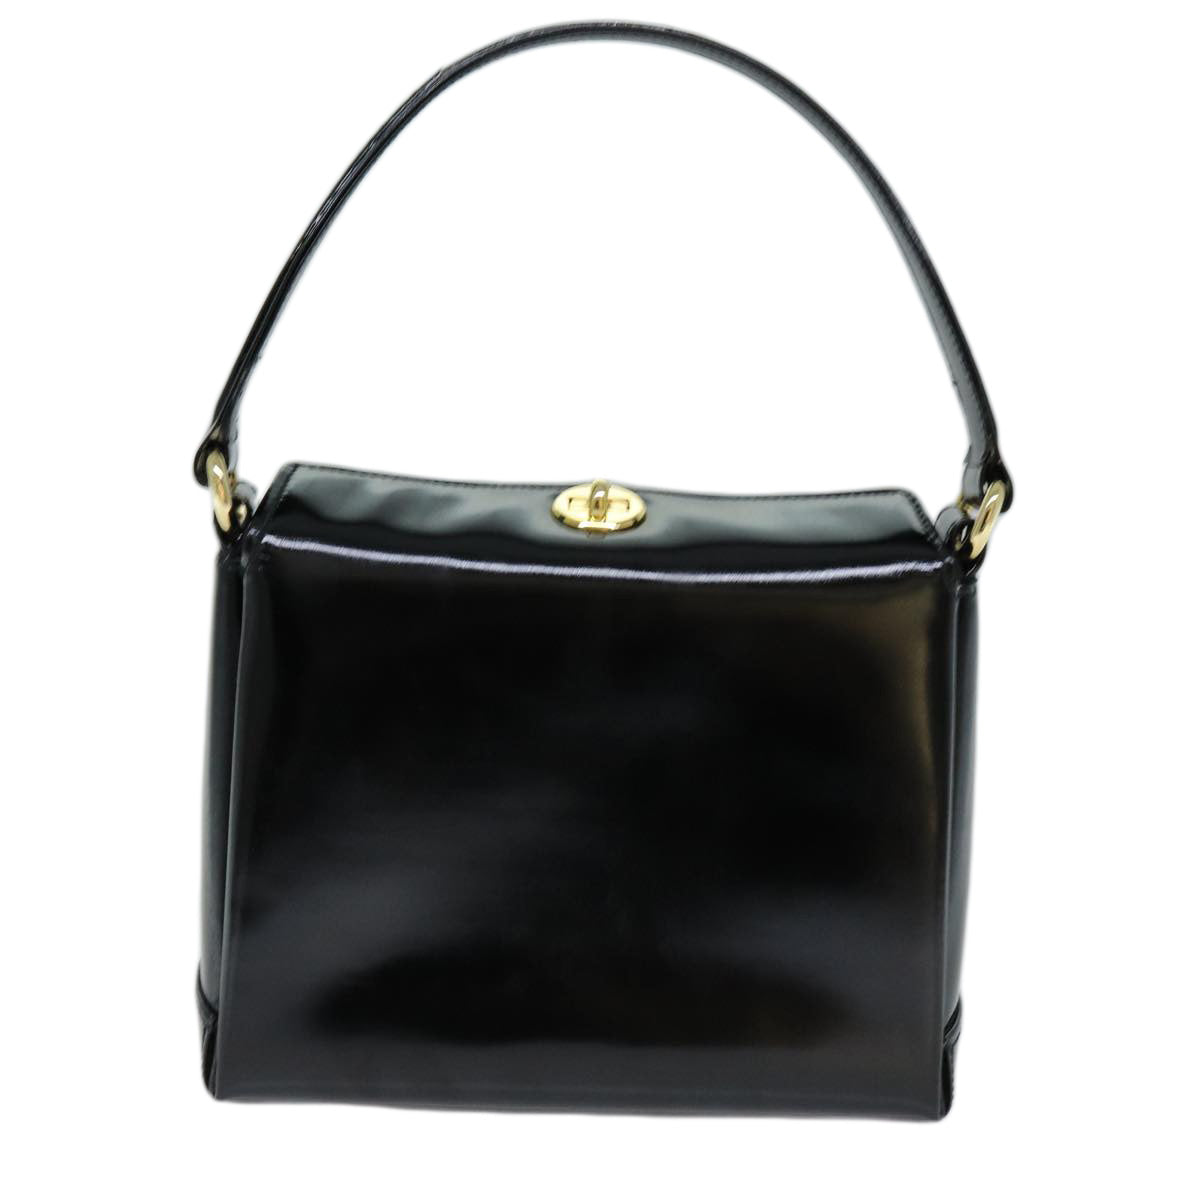 GUCCI Hand Bag Patent leather Black 000 110 0907 Auth 74593